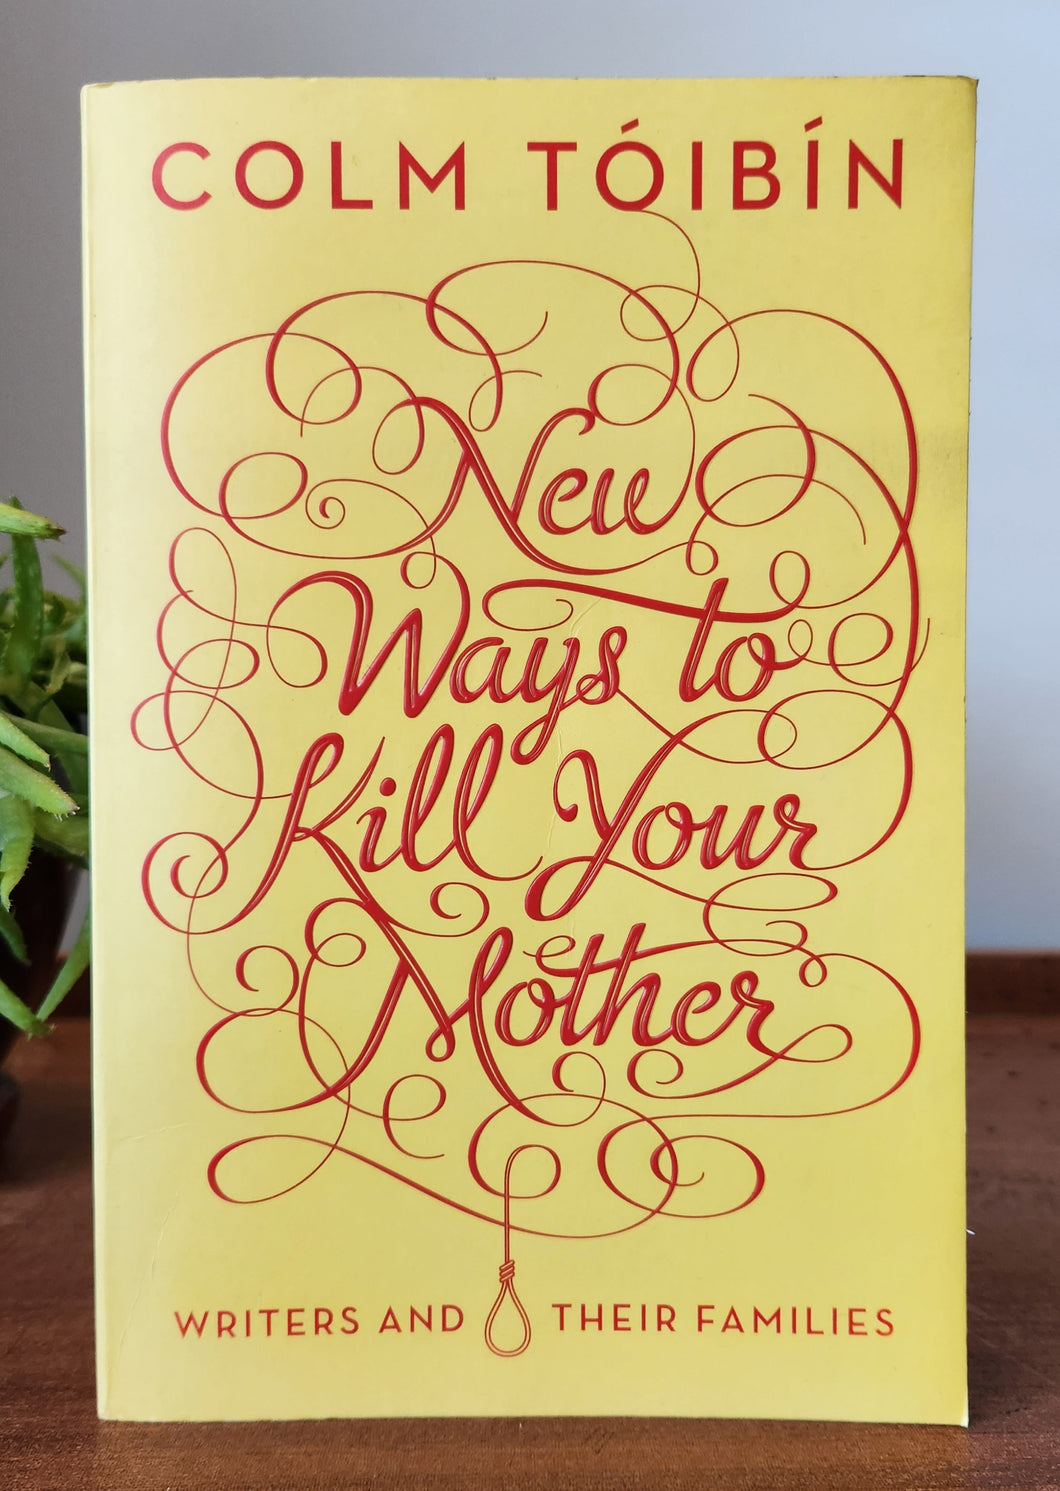 New Ways to Kill Your Mother: Writers and Their Families by Colm Tóibín